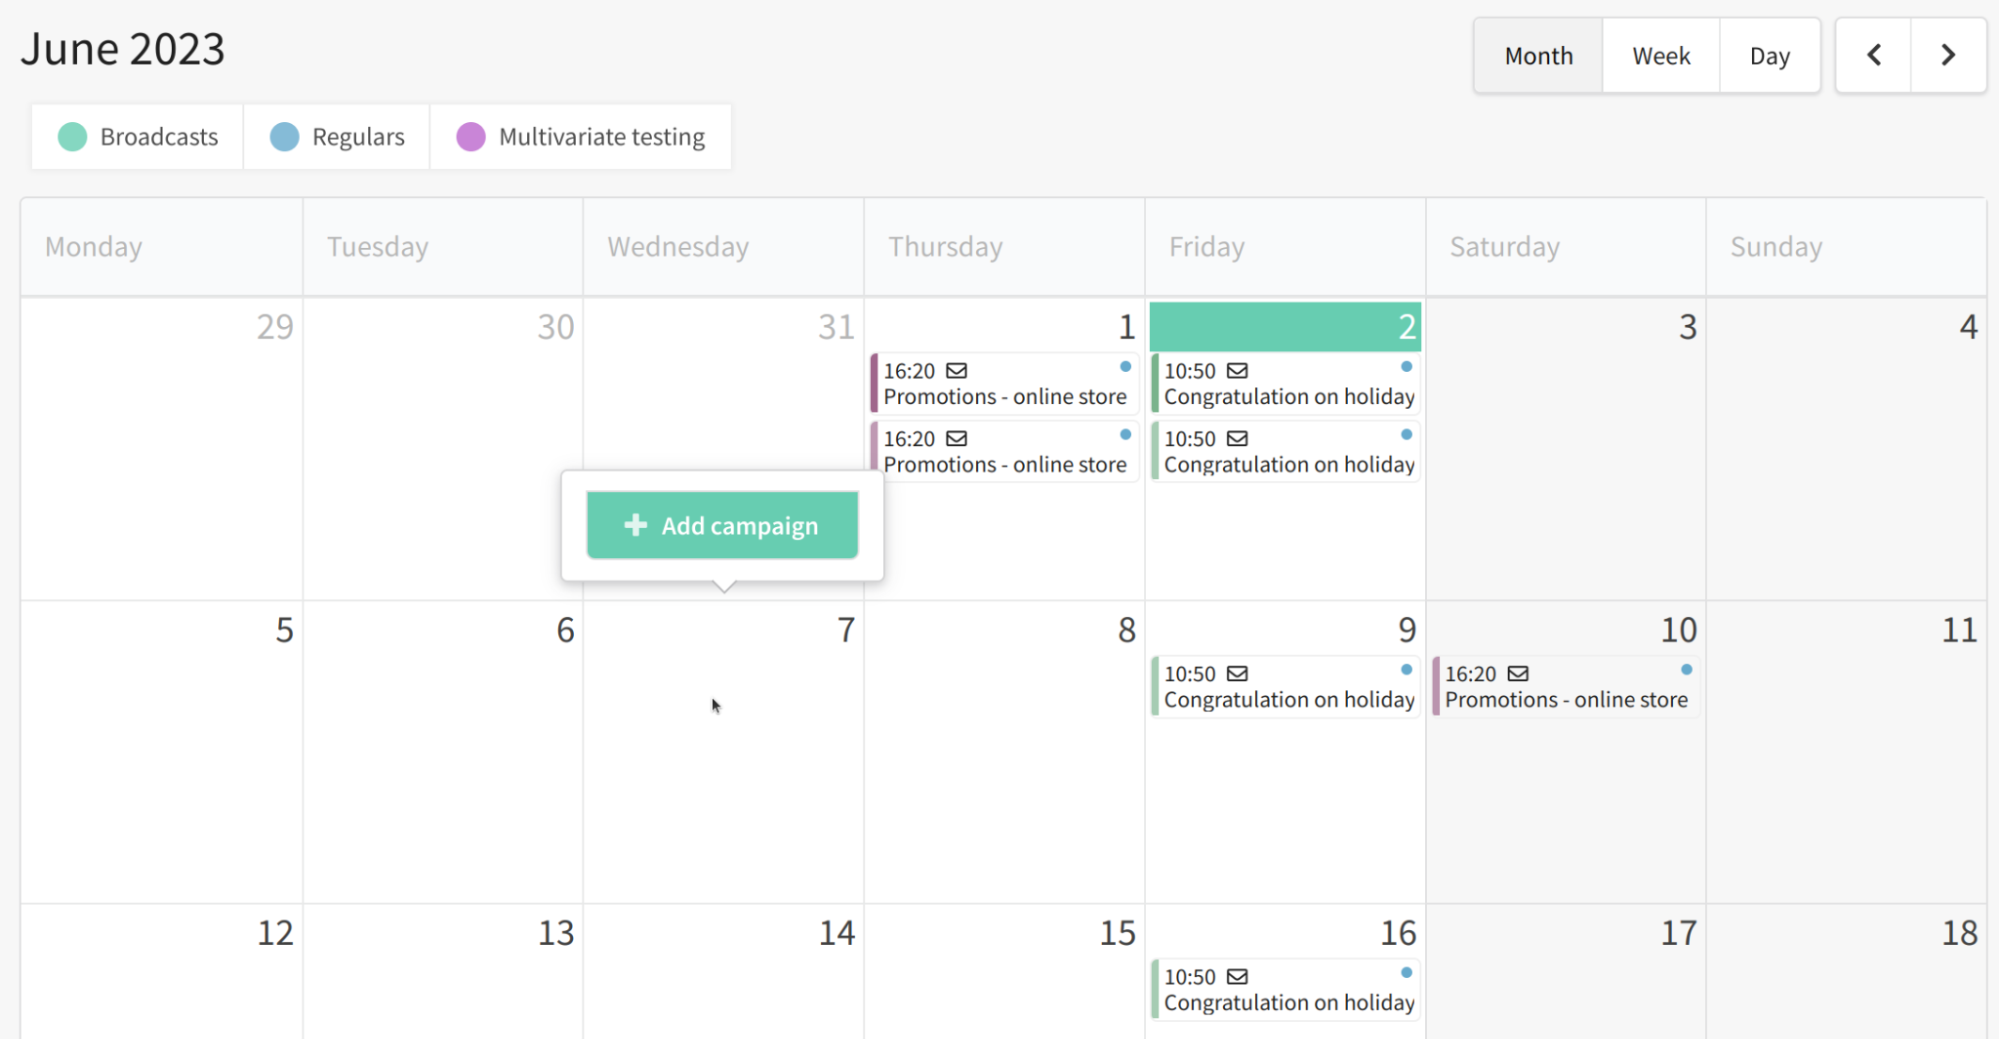 How to create a marketing campaign from the calendar